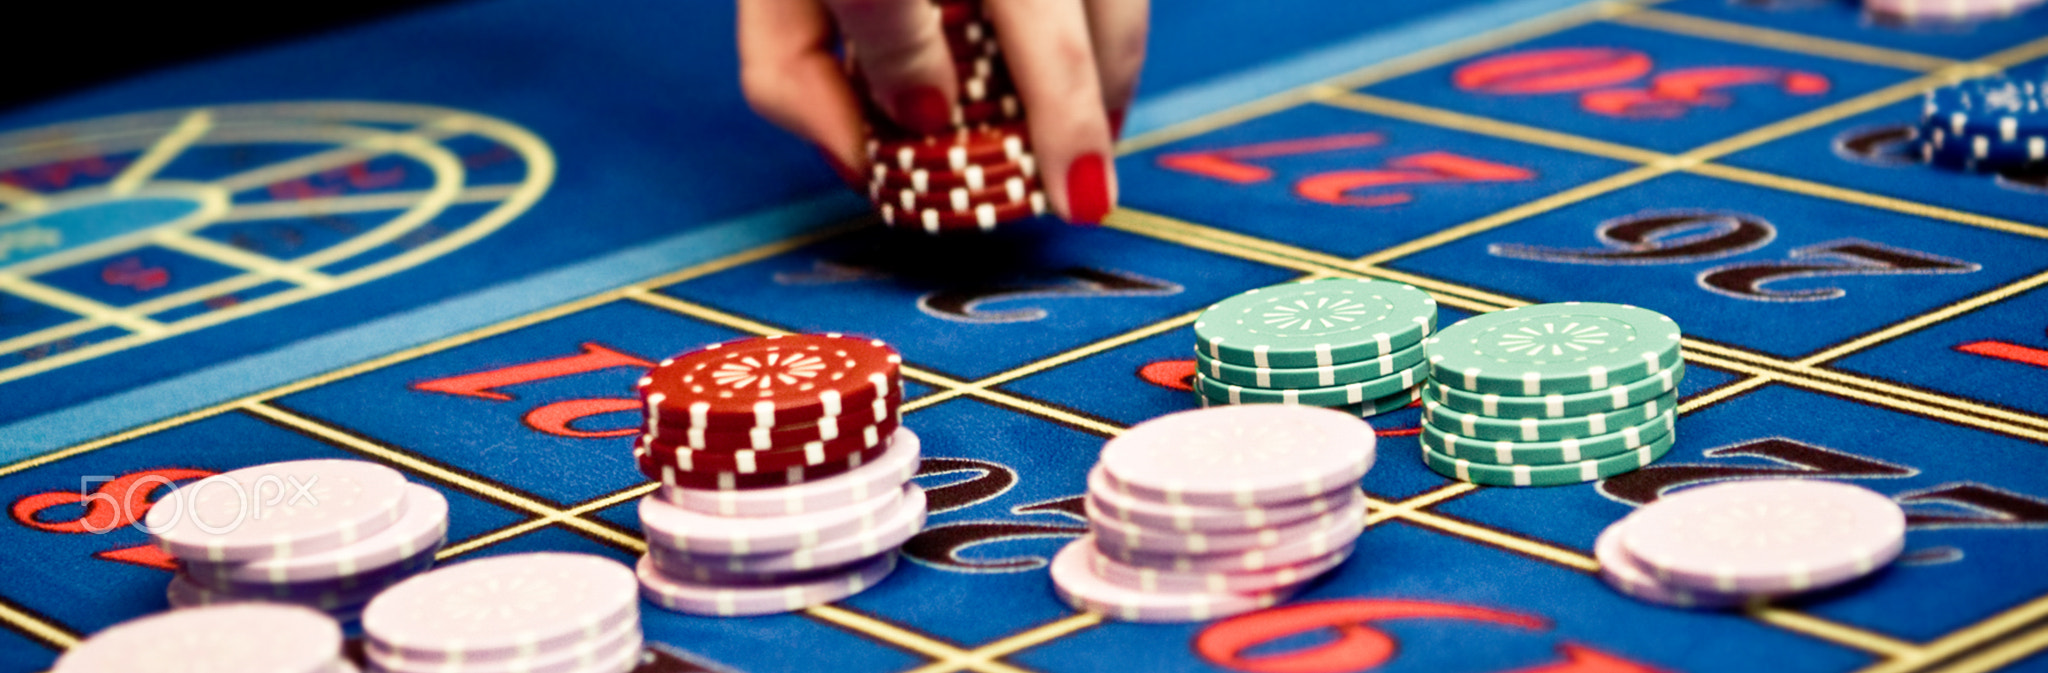 Betting and playing roulette in casino, gambling ad